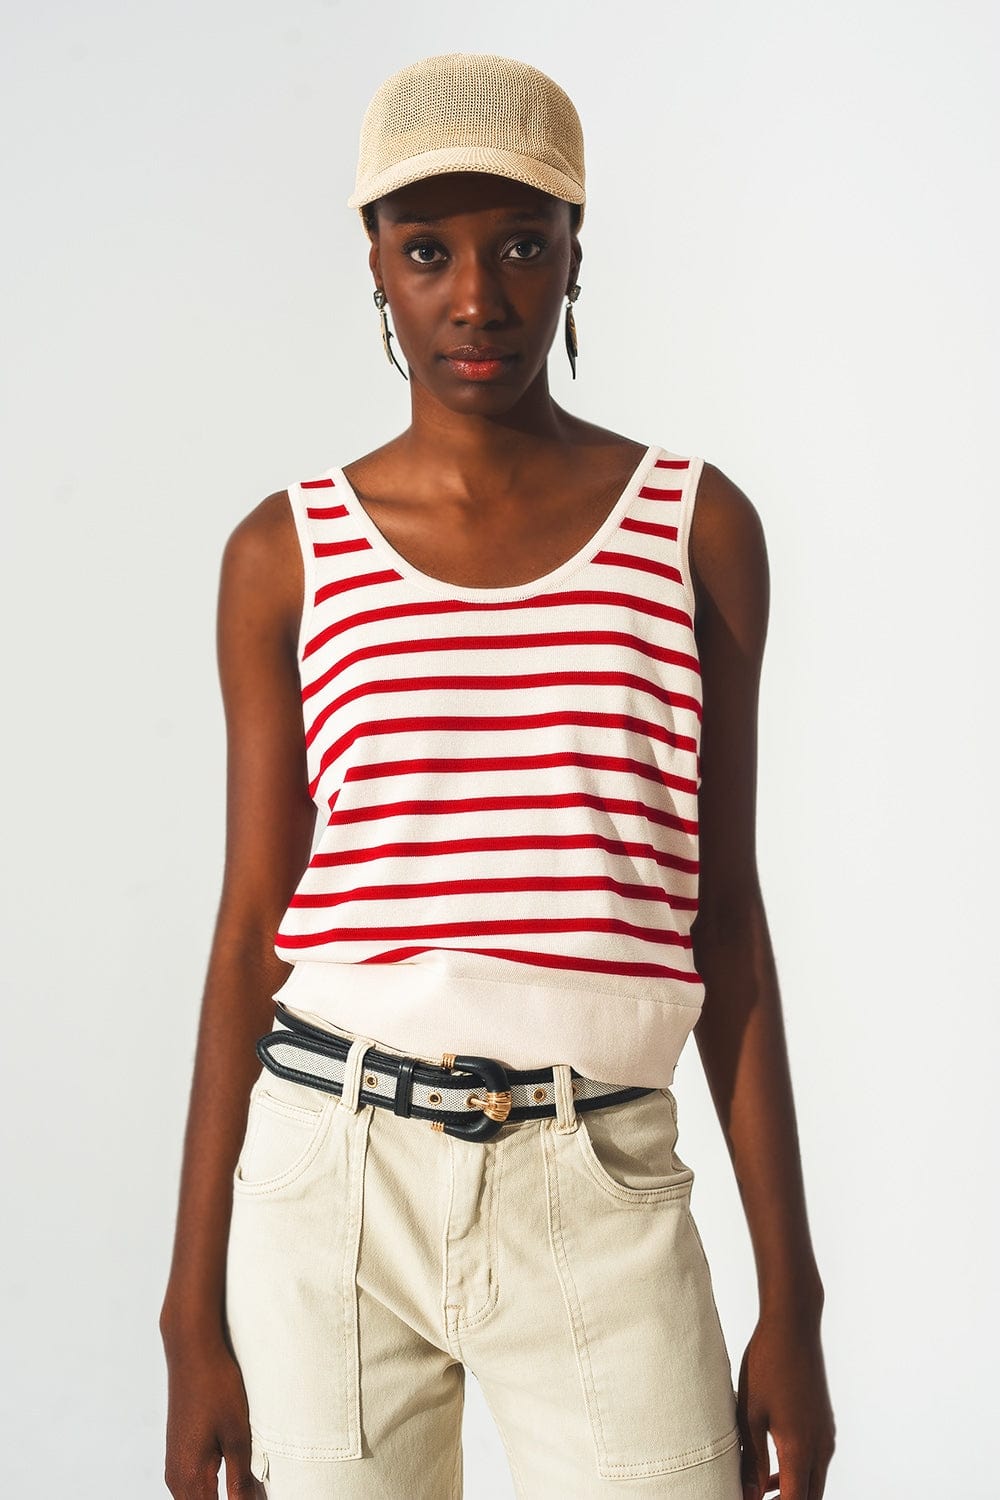 Q2 Tops Striped cropped top in red and white